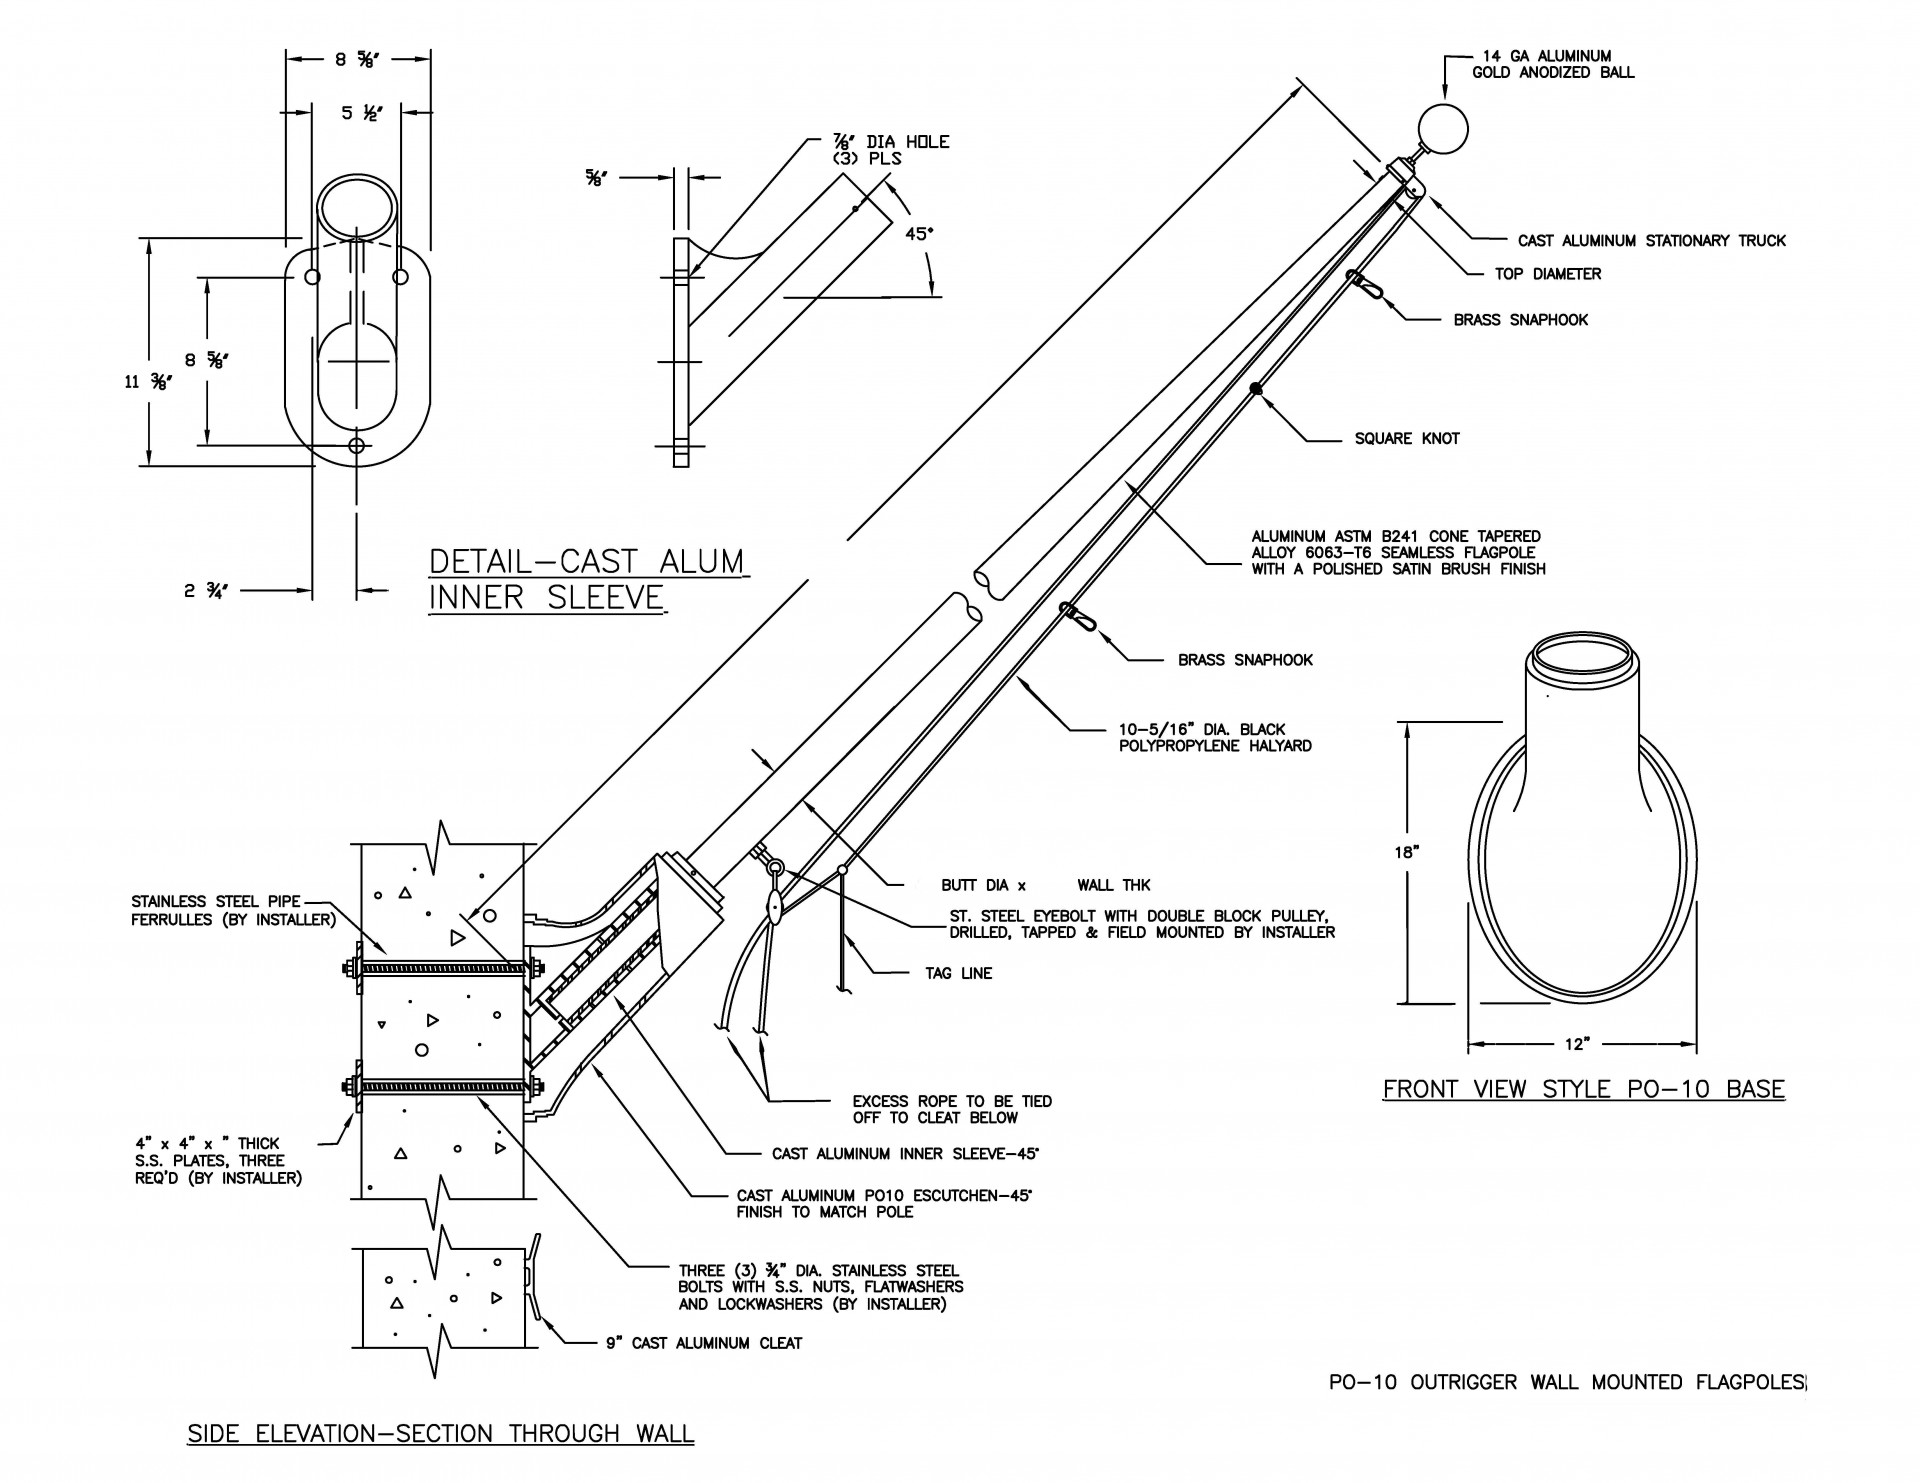 PO-10 Outrigger Wall Mounted Flagpole Drawing